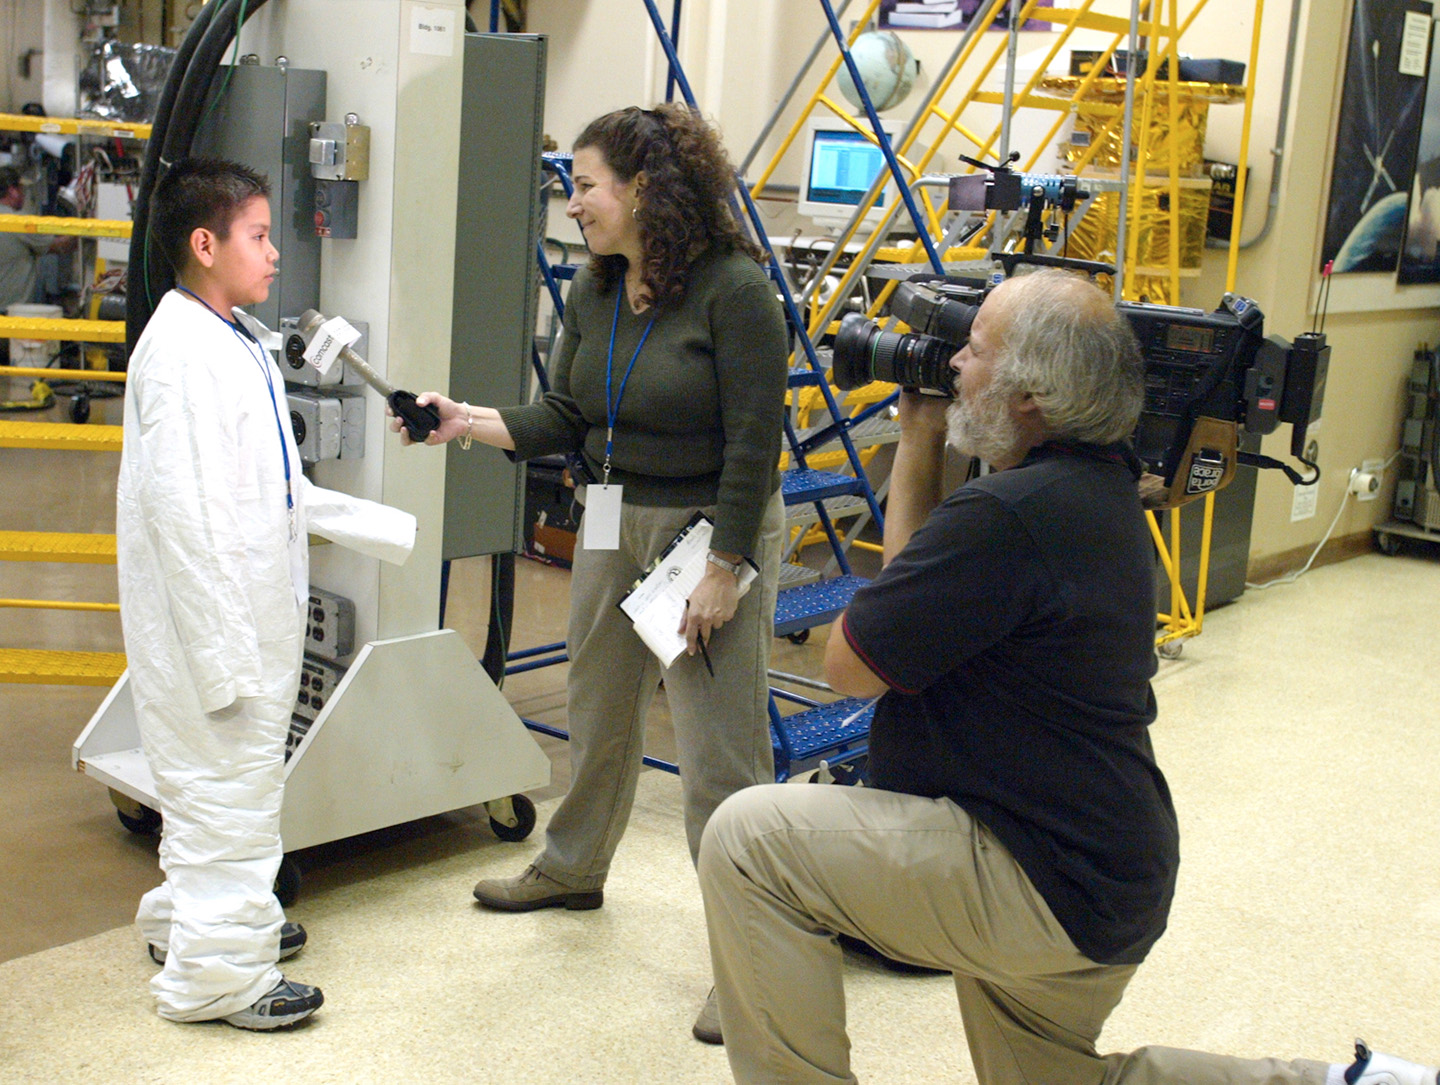 Student interviewed about his experience at Space Academy